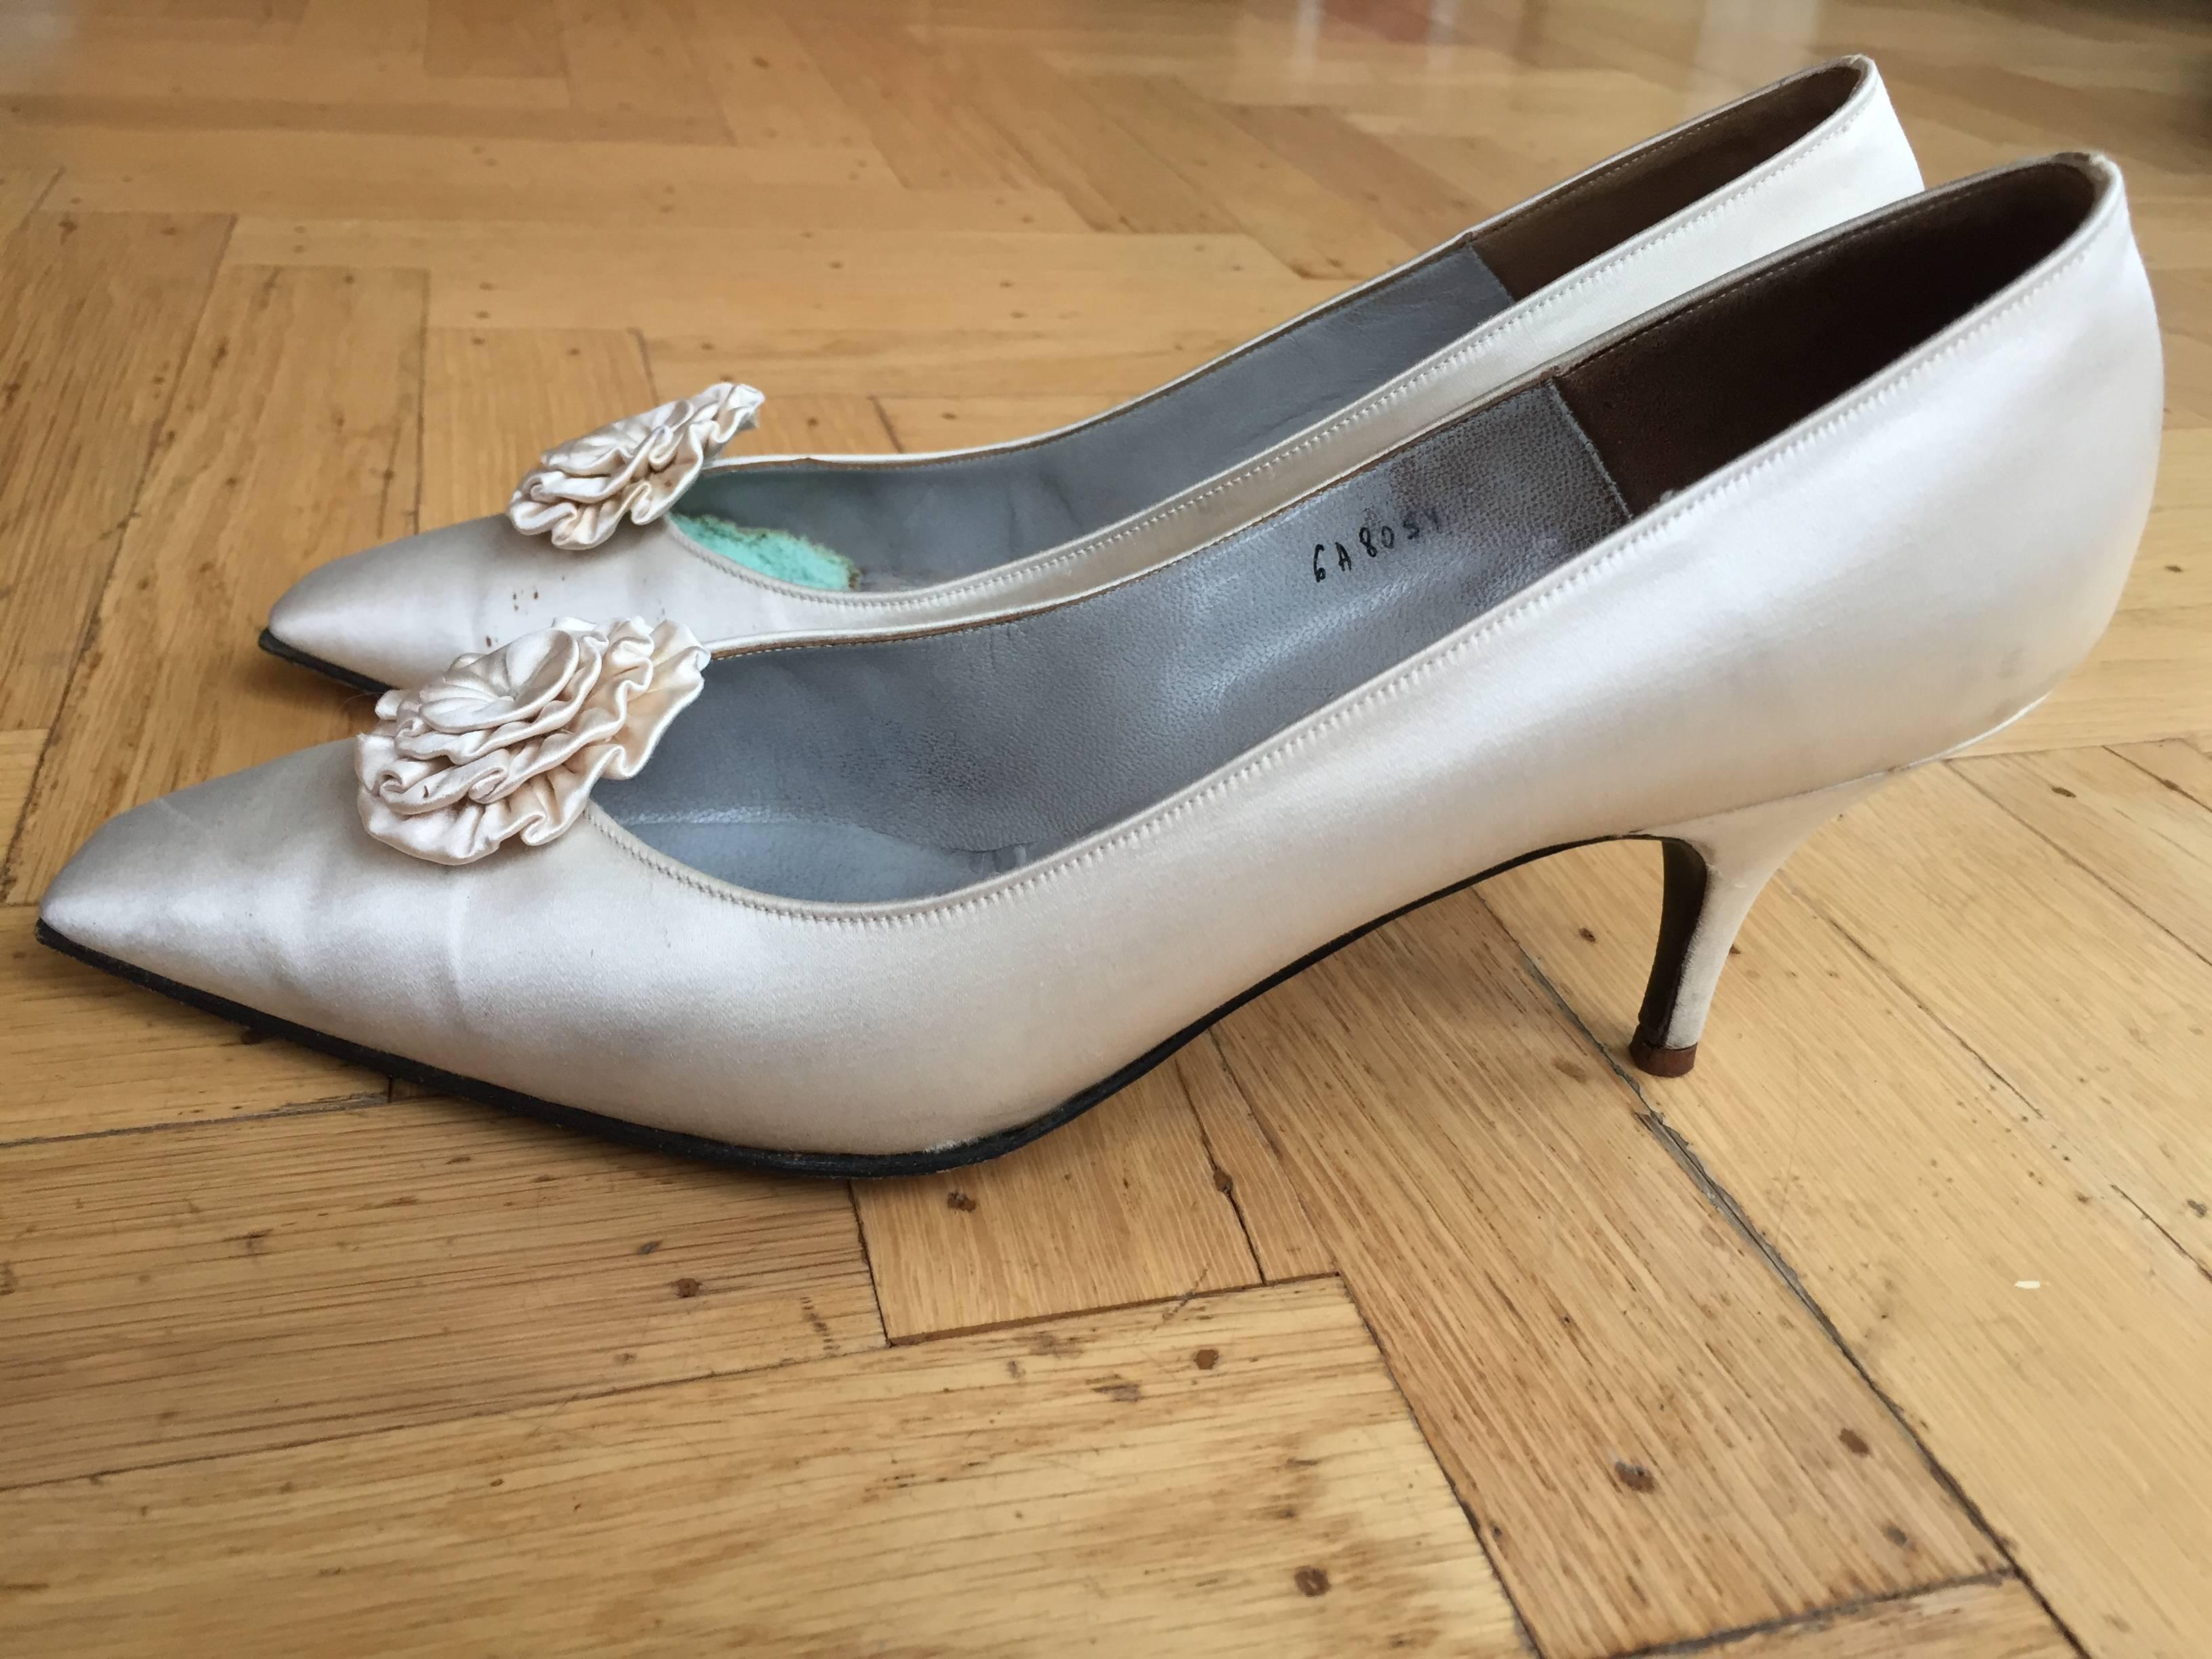  Ivory Silk pumps with rosette on pumps from Christian Dior by Roger VIvier circa 1958.
Made to measure for Eleanor.
She wore size 6 and 6 1/2
From the collection of Eleanor Louise Christenson de Guigné.
Eleanor de Guigné was one of the most